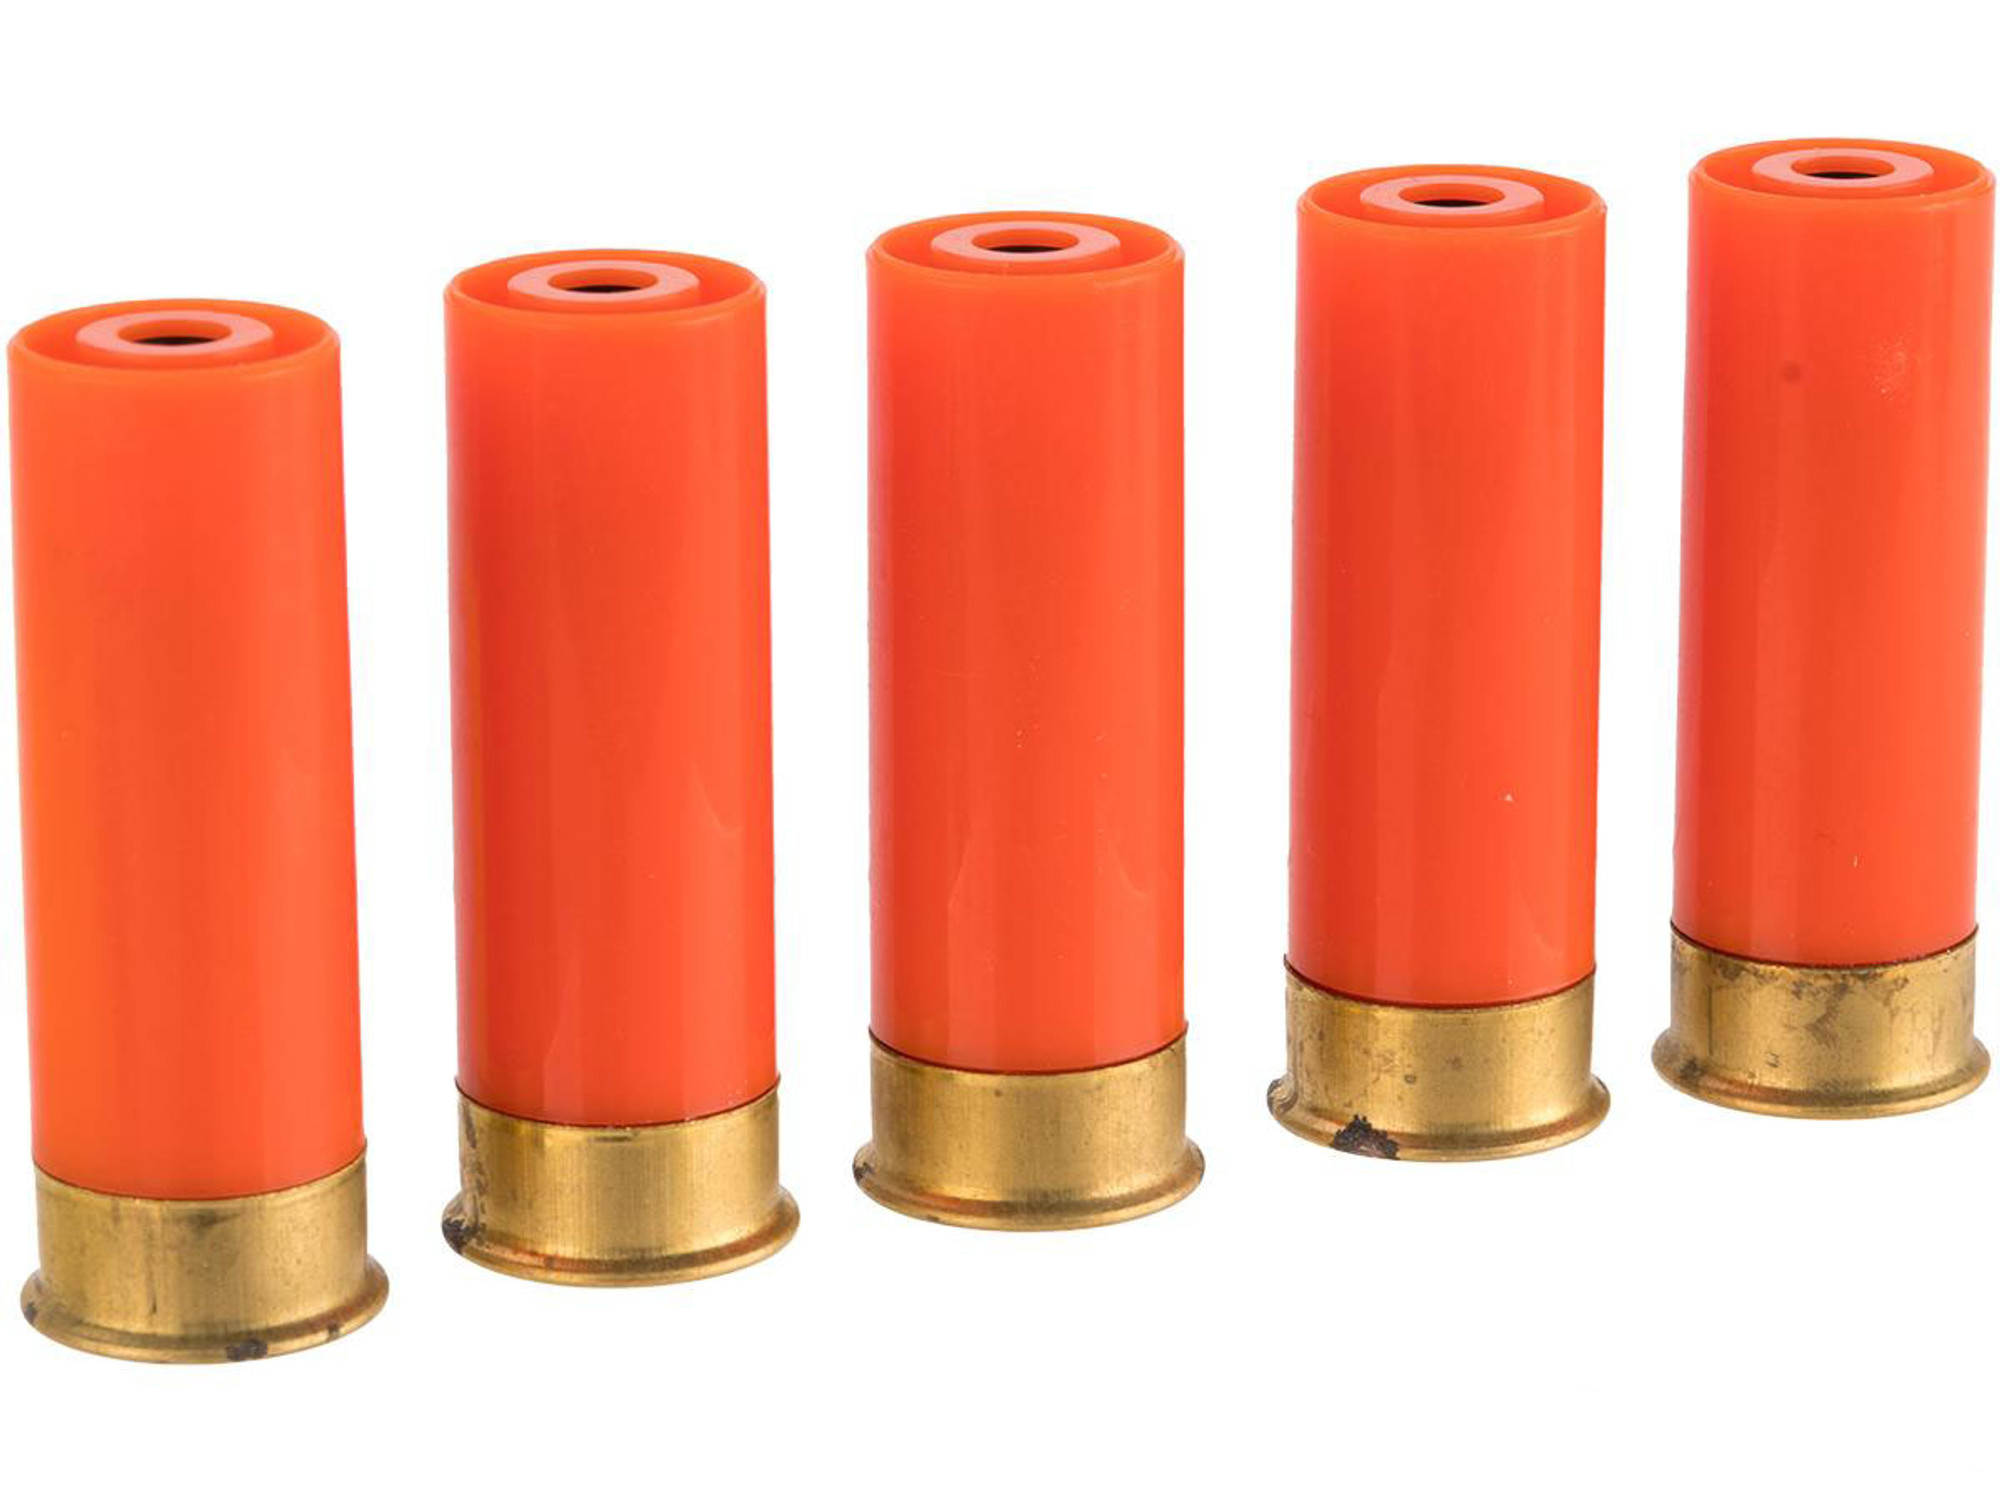 PPS Airsoft M870 Plastic Green Gas Shotgun Shells for PPS Shotguns (Package: Set of 5)